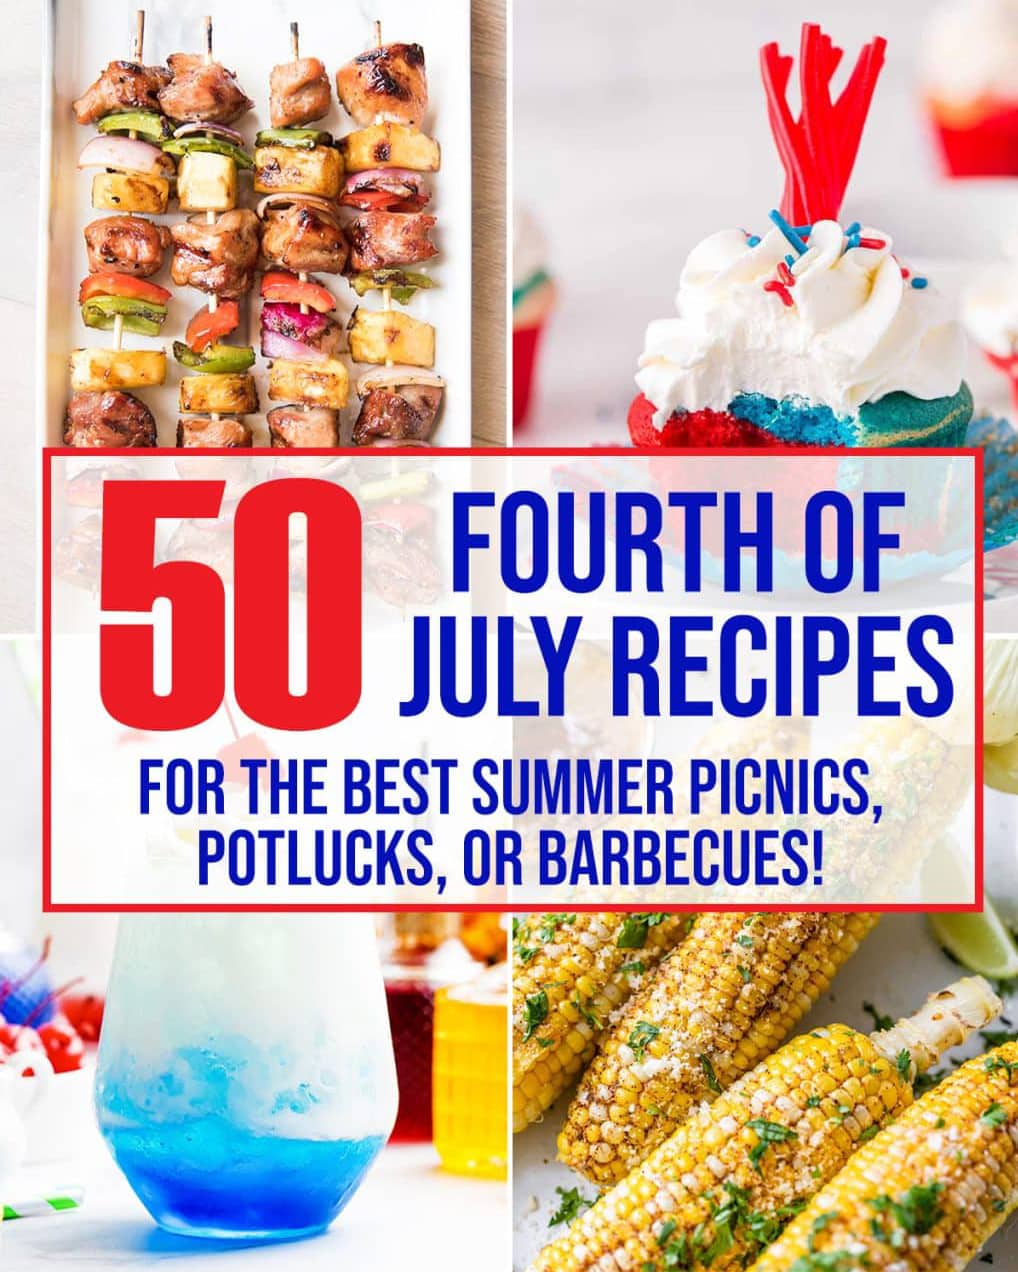 A collage of four food images, kebabs, cupcakes, italian sodas, and corn with a text overlay saying they are great for the Fourth of July.